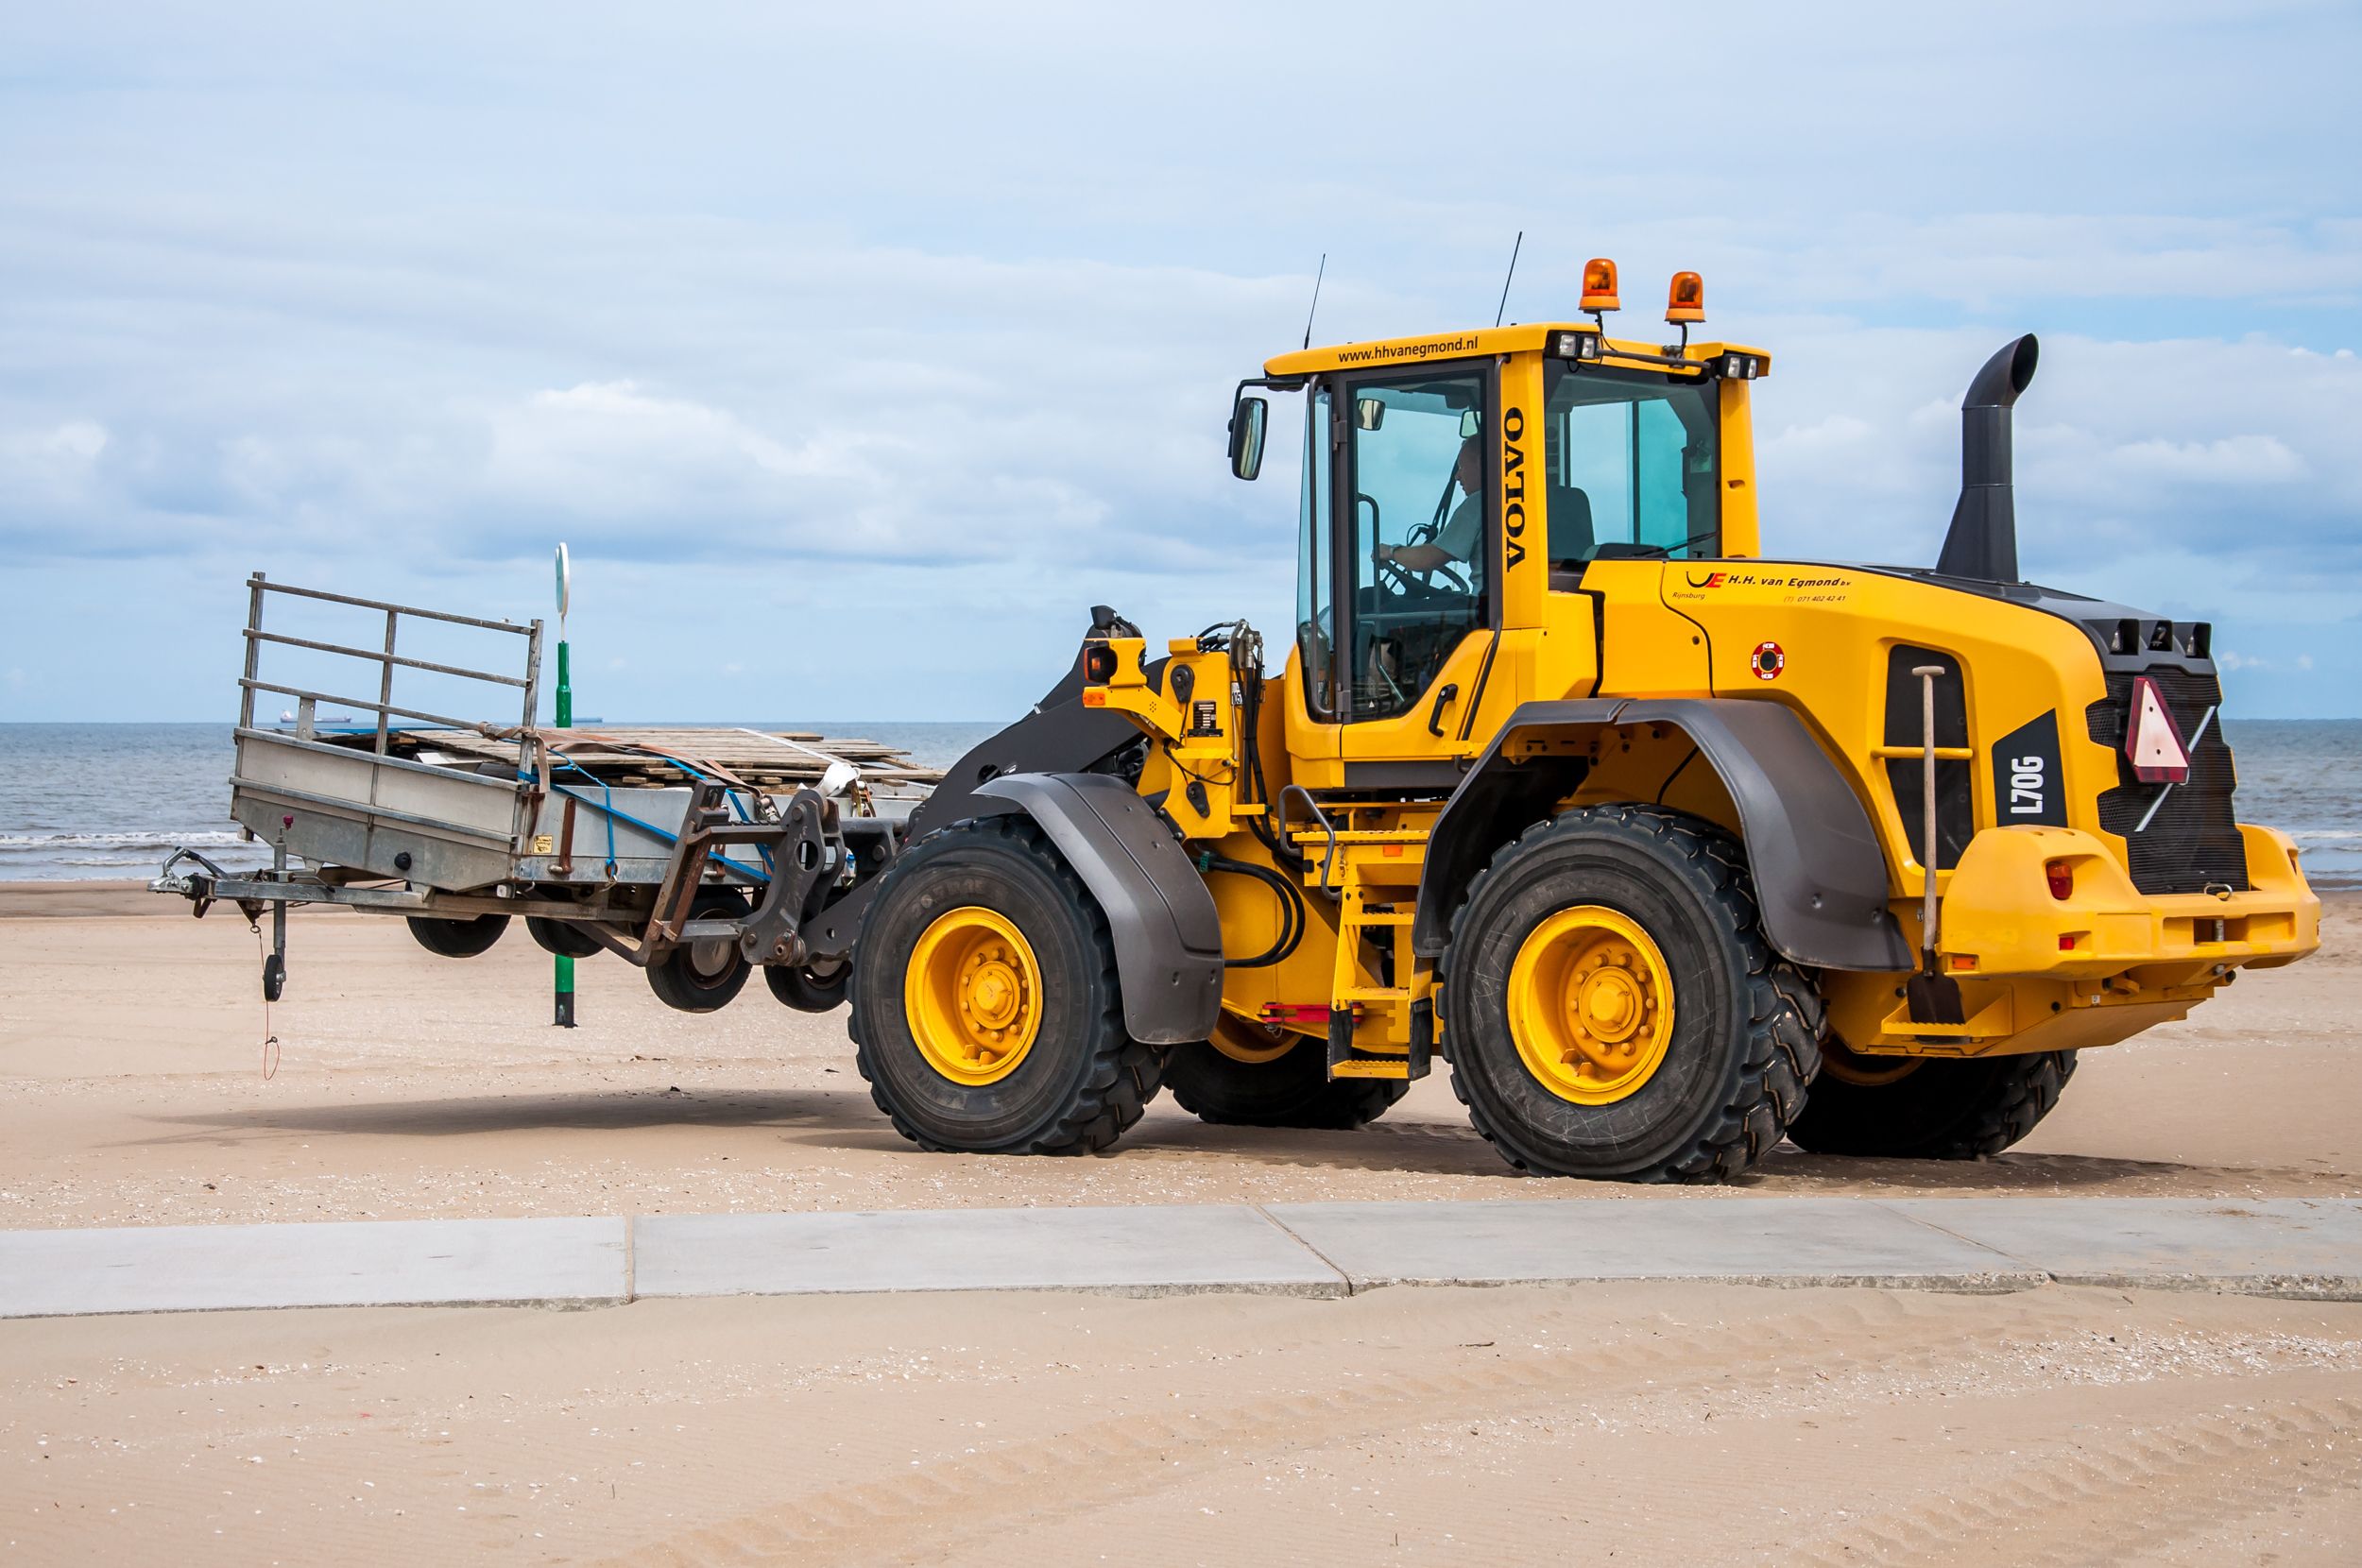 Bulldozer tractor working on a beach photo